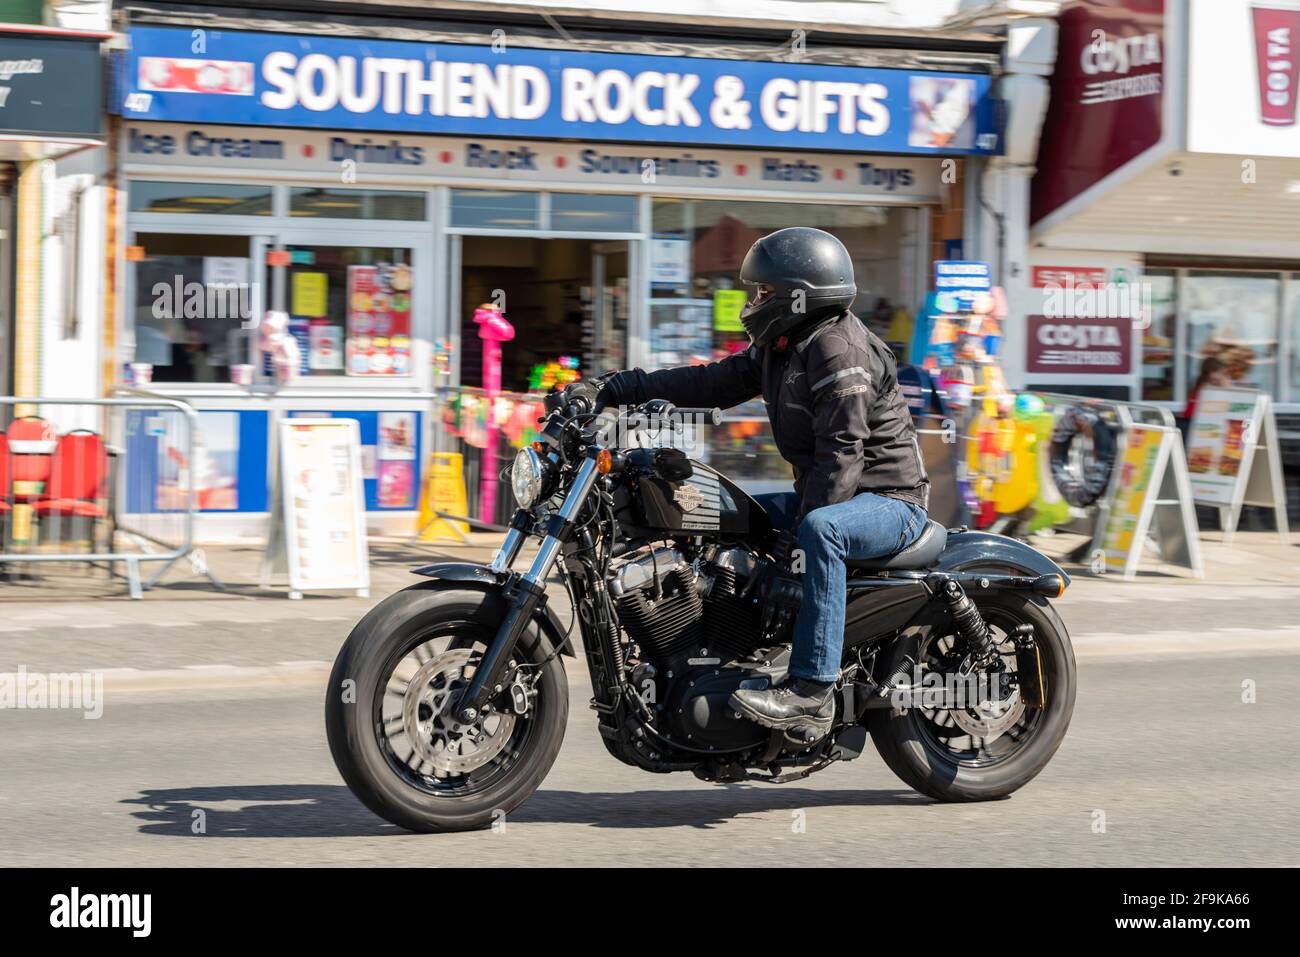 Harley Davidson Forty Eight motorcycle, motorcyclist riding in Southend on Sea, Essex, UK, on a sunny, bright Spring day. Passing Southend Rock shop Stock Photo